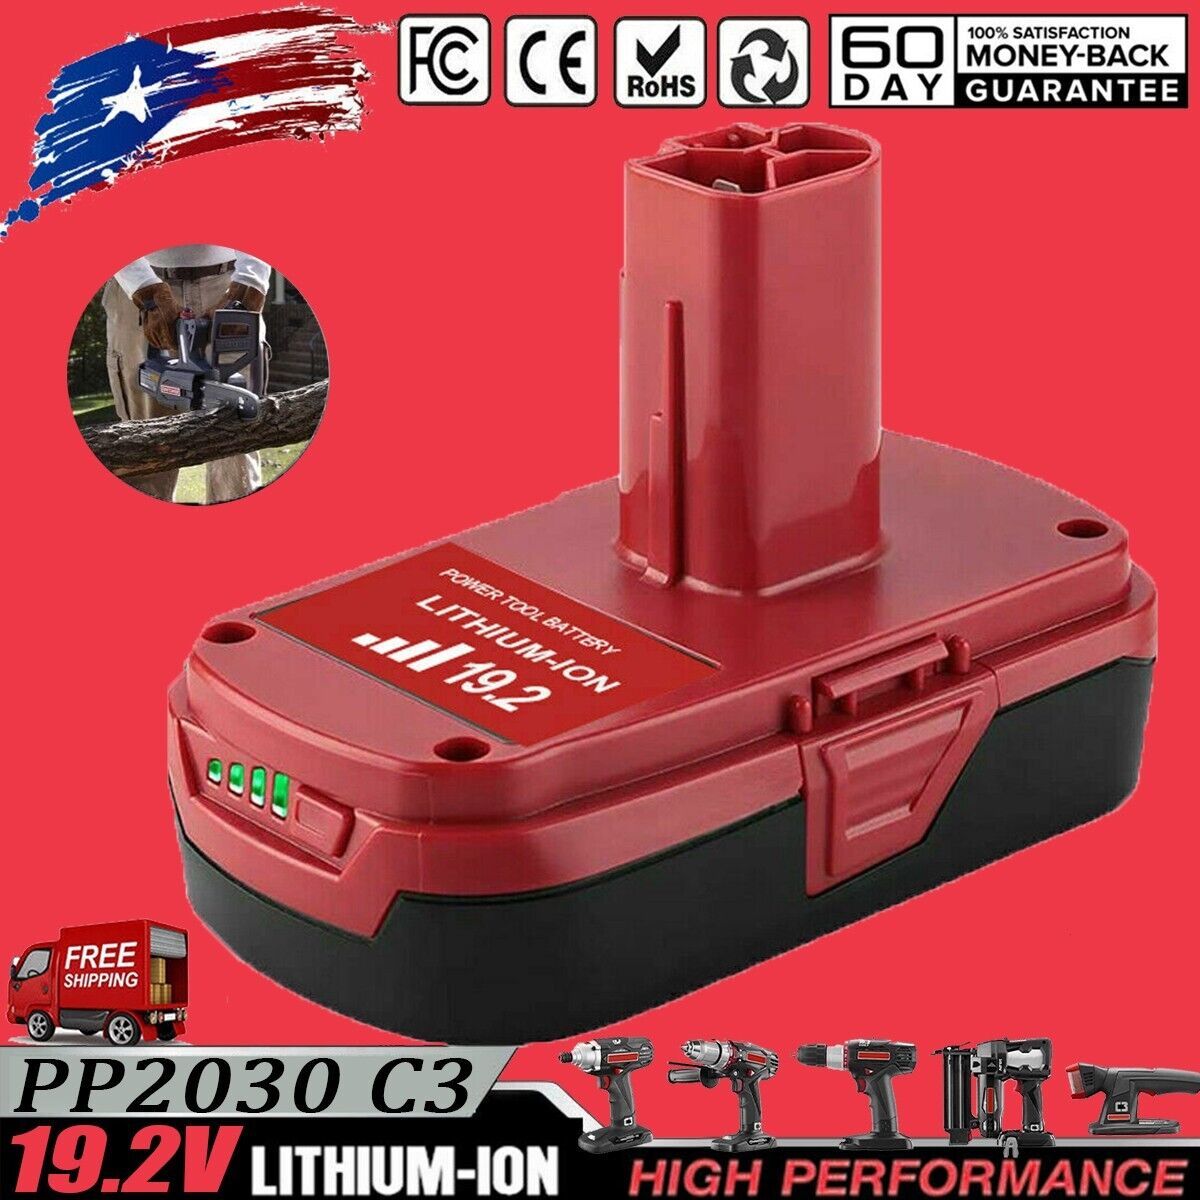 19.2 Volt For Craftsman C3 Lithium-Ion XCP Battery PP2030 11375 130279005 US - $33.99